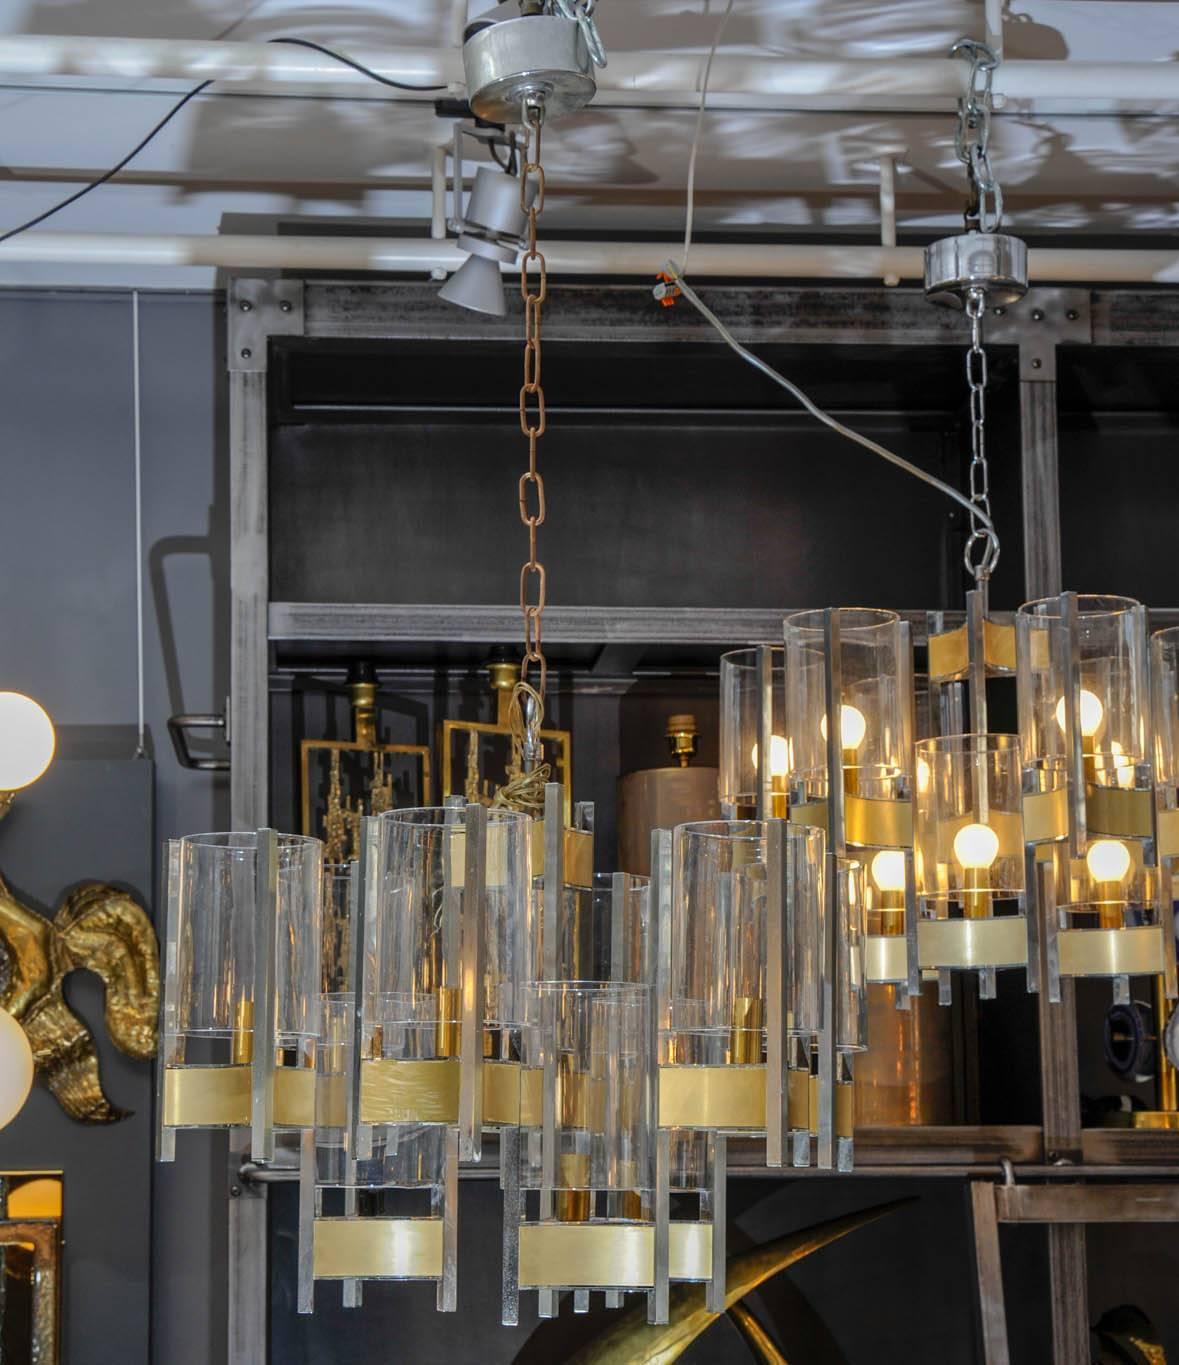 Pair of chandeliers designed by Sciolari with nine lights, made of nickel finish stems and brass color panels. Each arms support a clear glass cylinder shade.